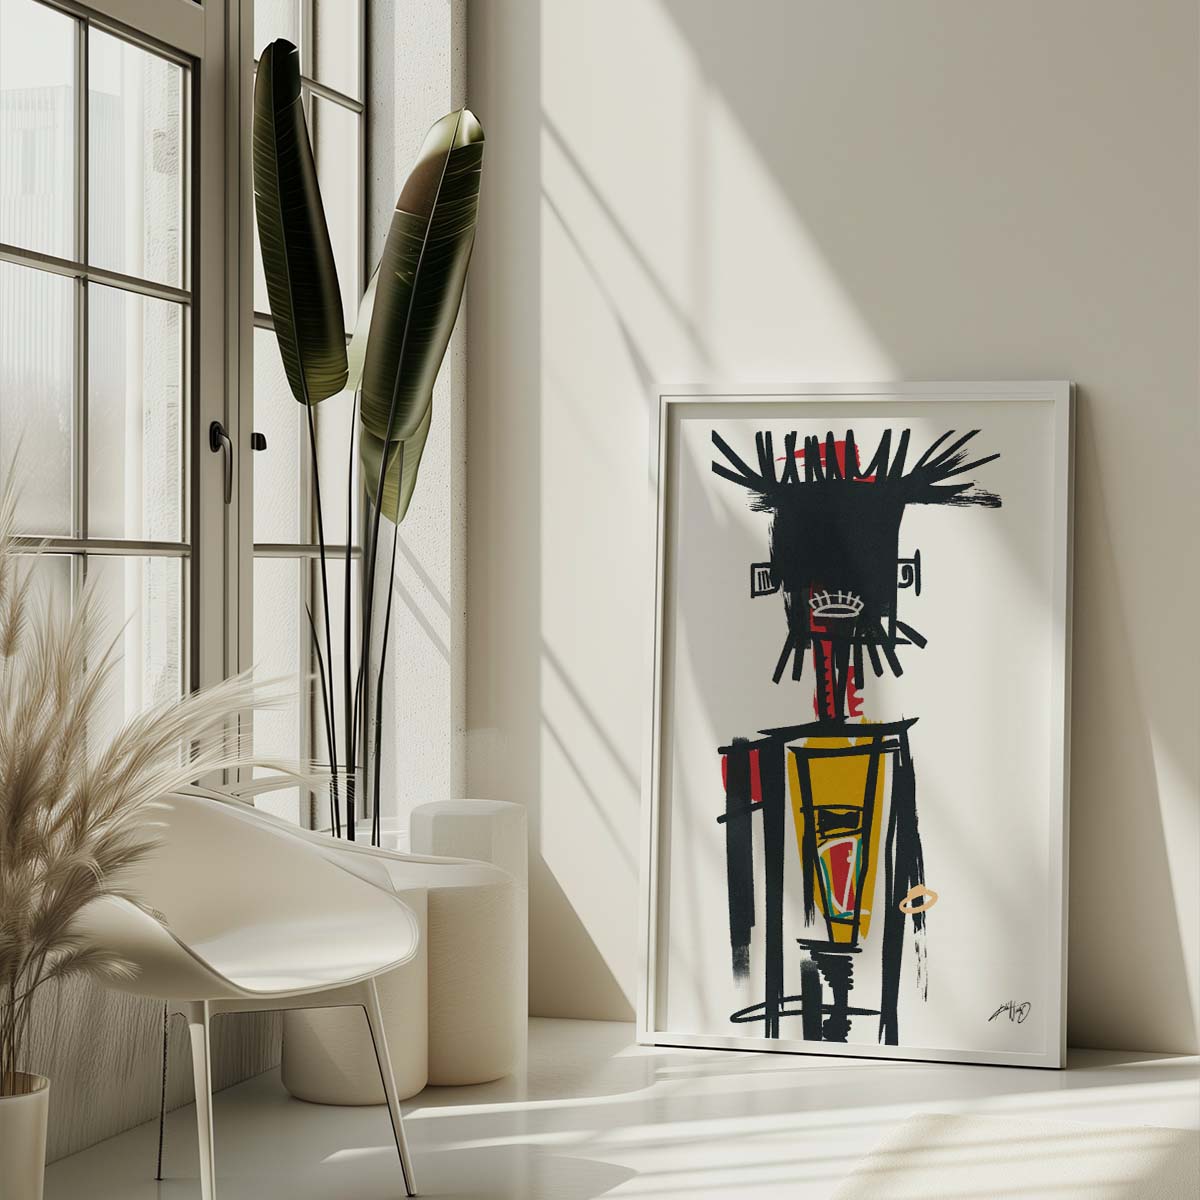 Two large pieces of abstract art featuring colorful figures with dark features and geometric shapes hanging on the wall above a sofa with white and beige cushions in a cozy living room. Artwotk by Kali Nuevo.